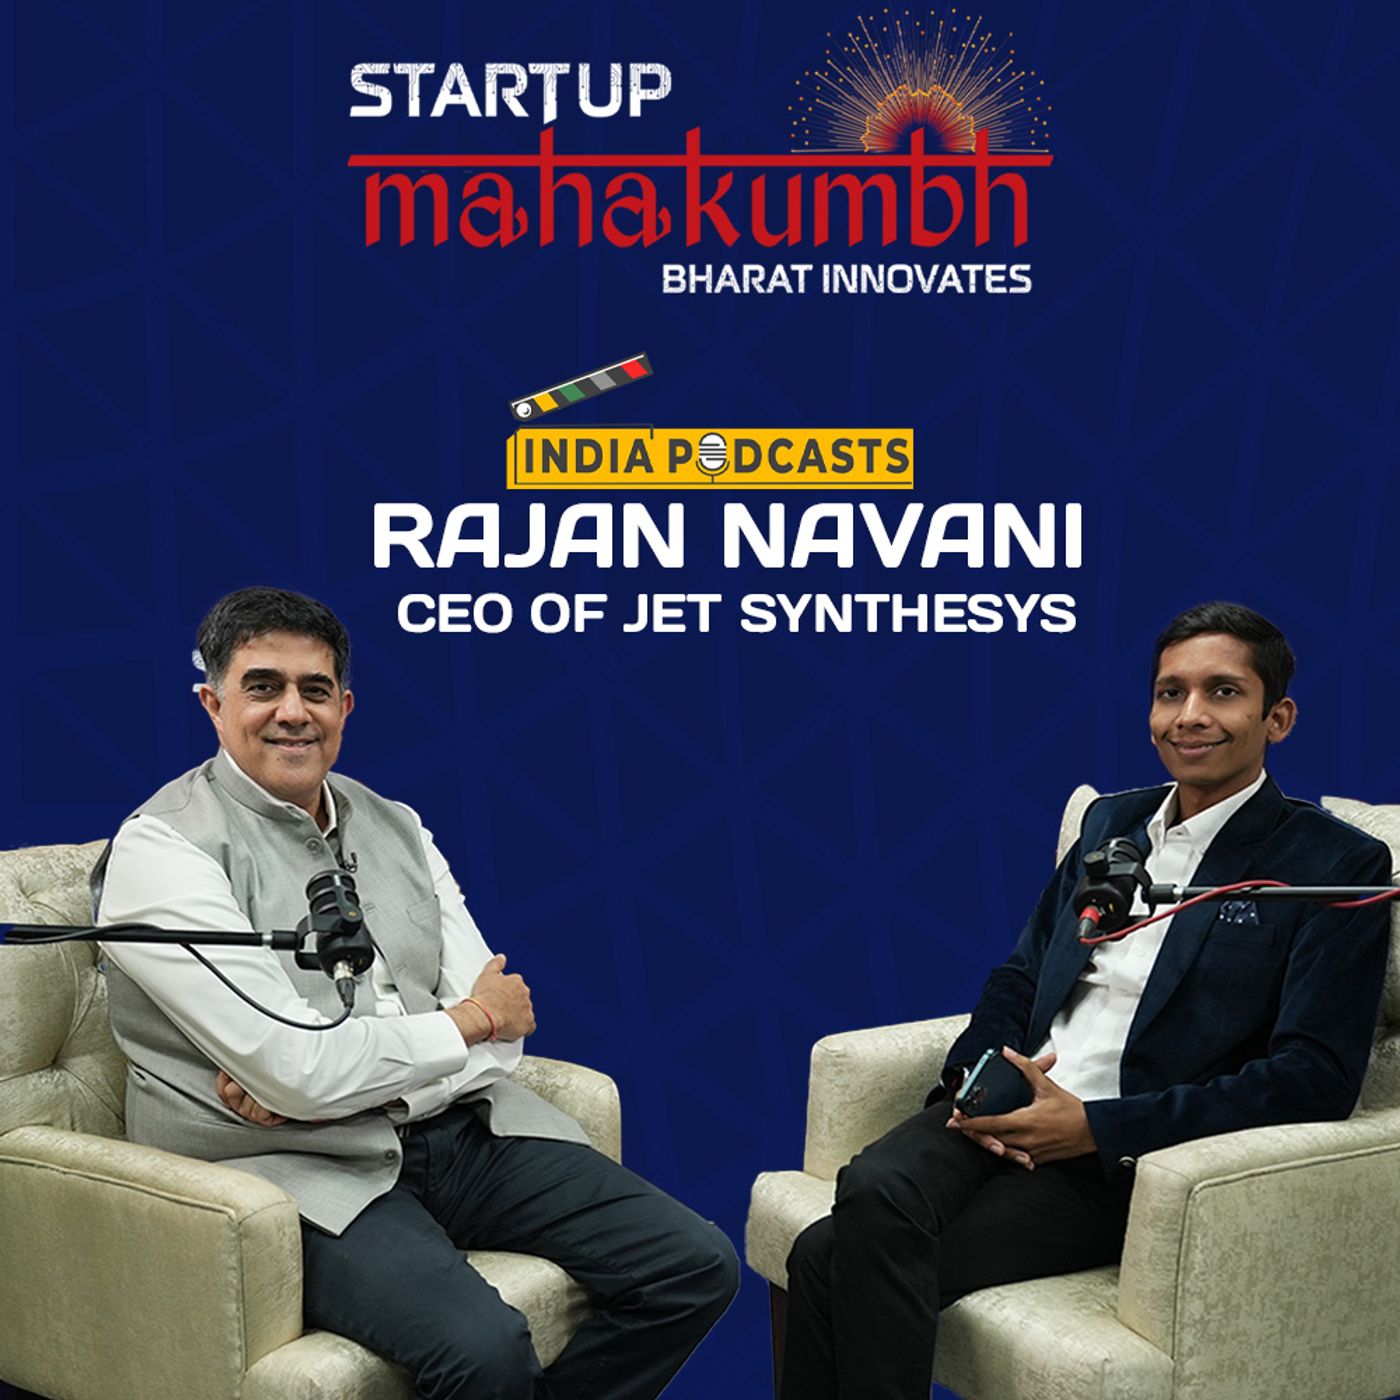 This Is A Great Time To Do A Lot More Globally: Rajan Navani,CEO, Jet Synthesys